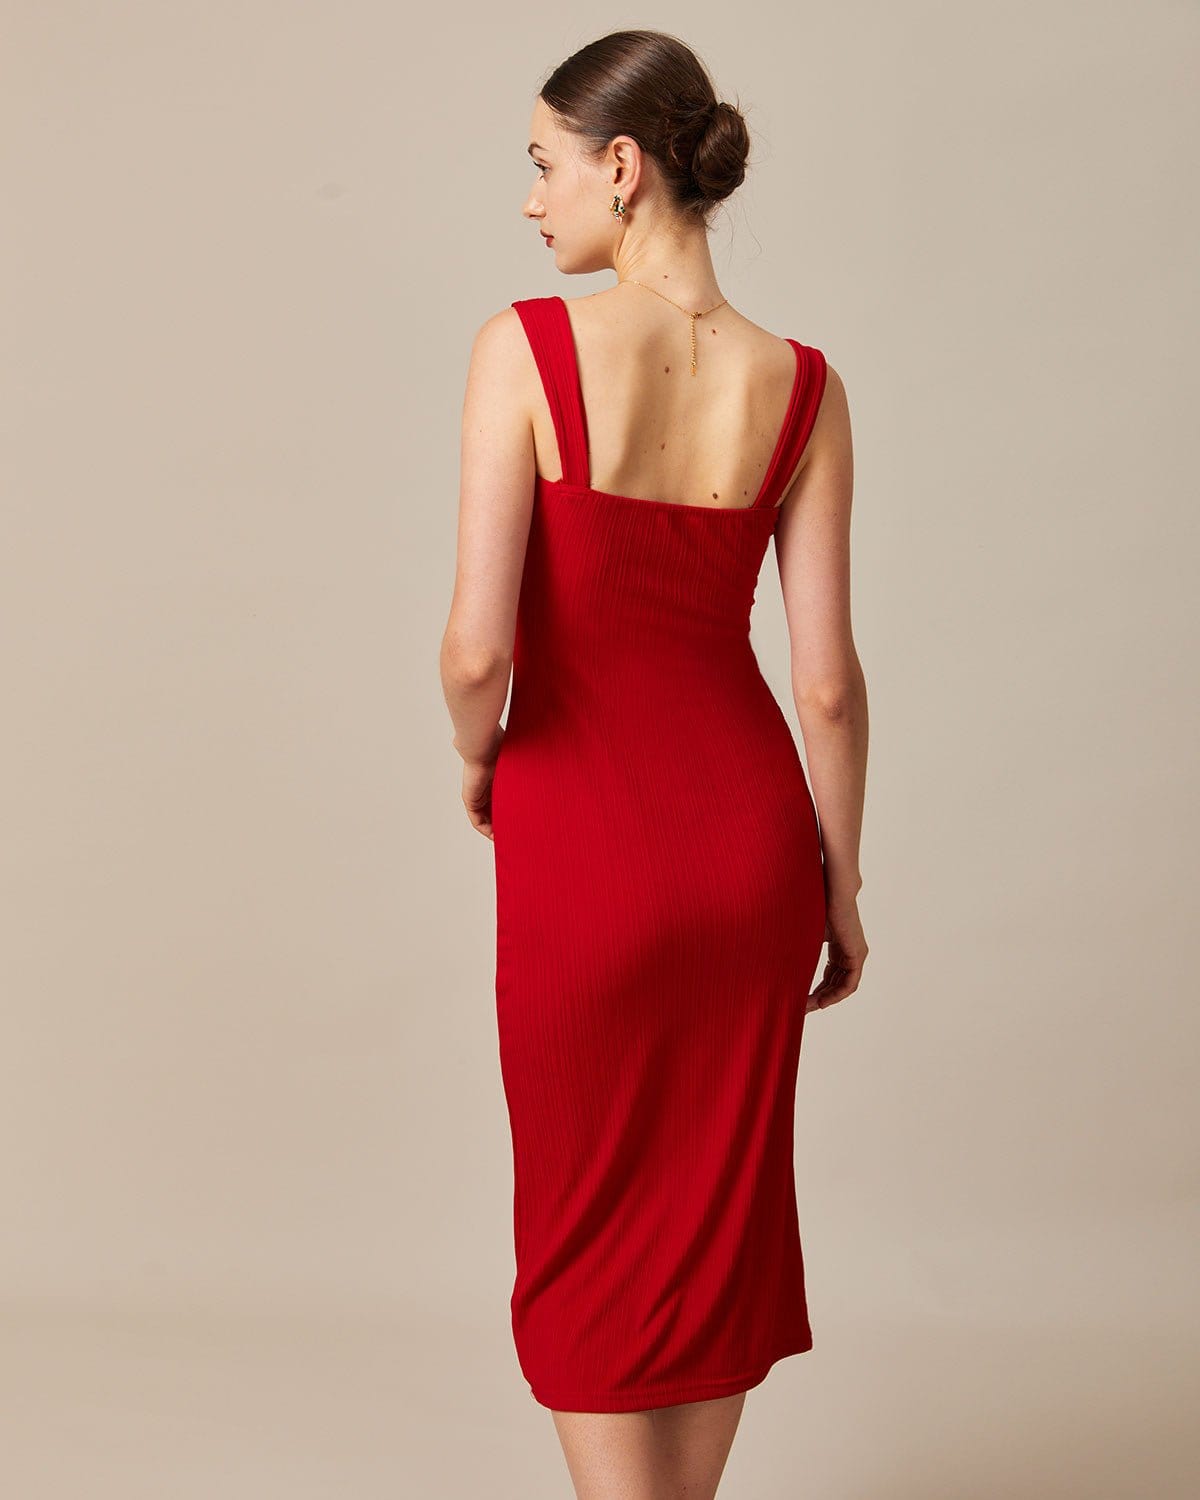 The Red Square Neck Ribbed Midi Dress